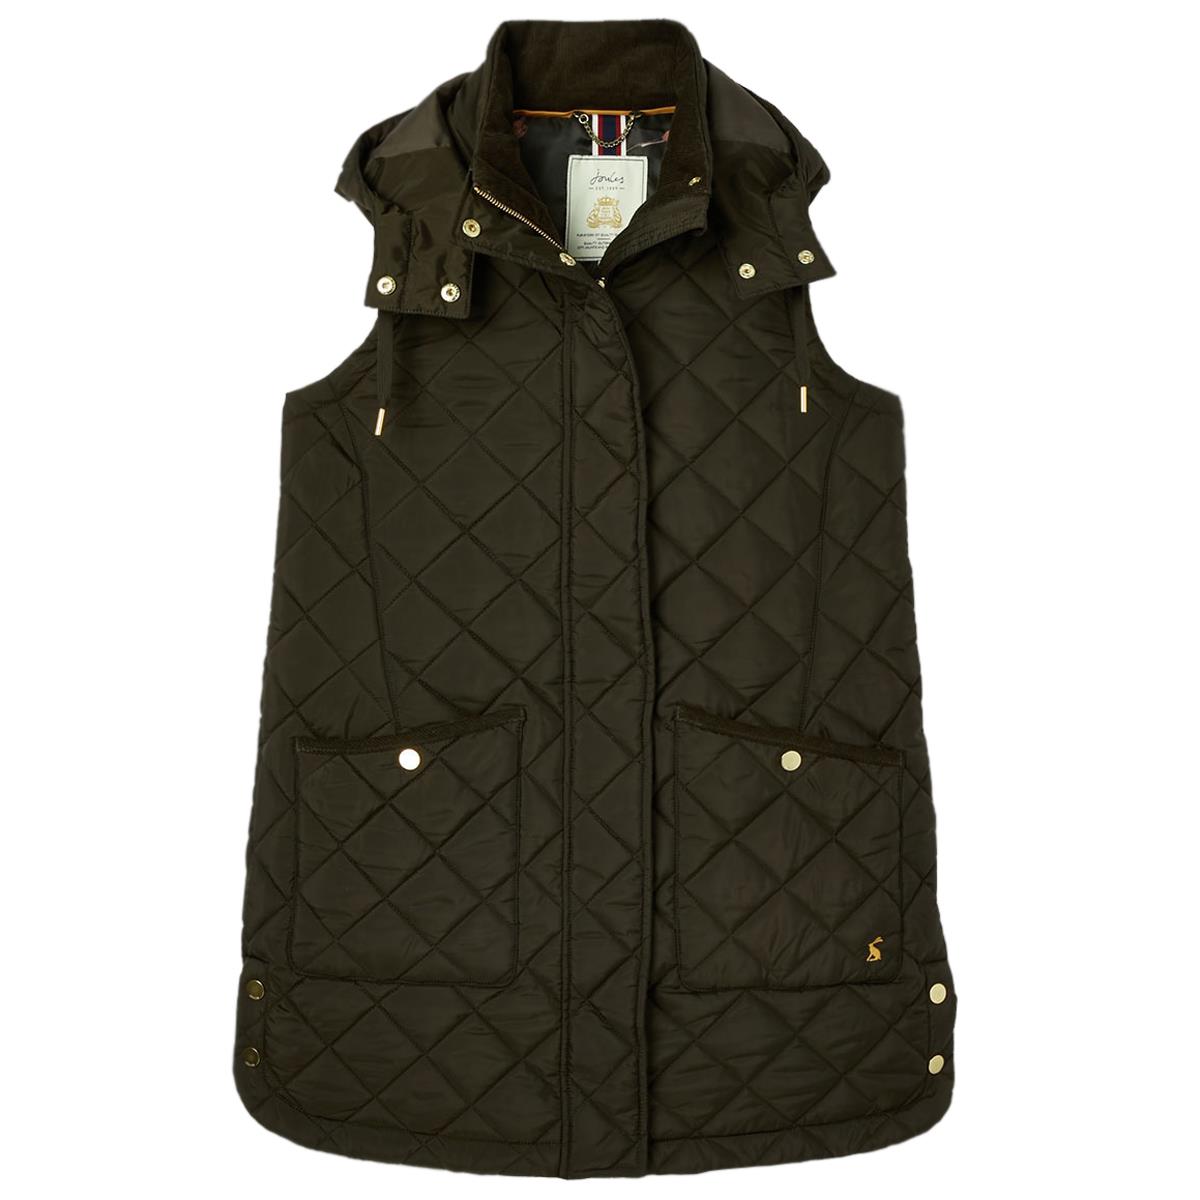 What are the characteristics of the Joules Chatham Gilet?